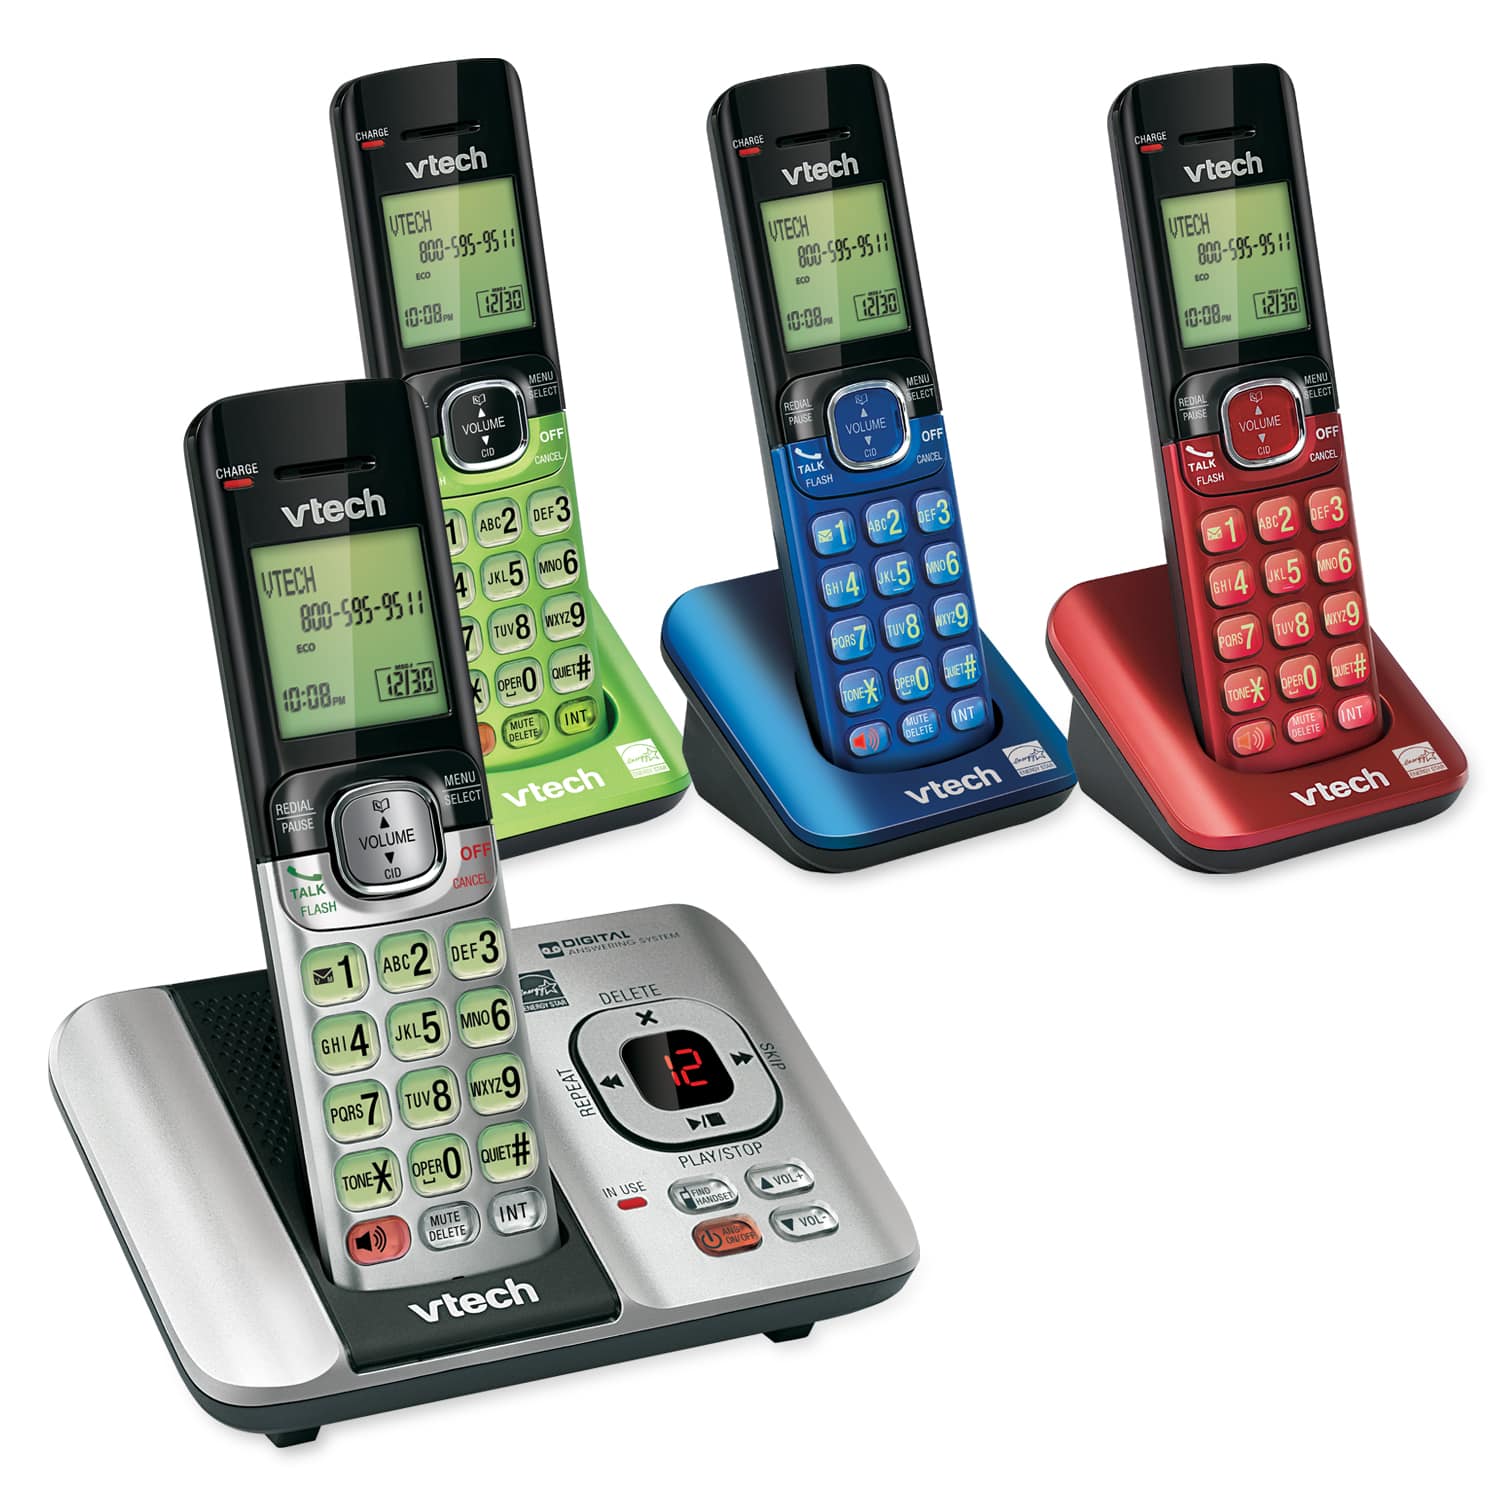 4 Handset Answering System with Caller ID/Call Waiting - view 2